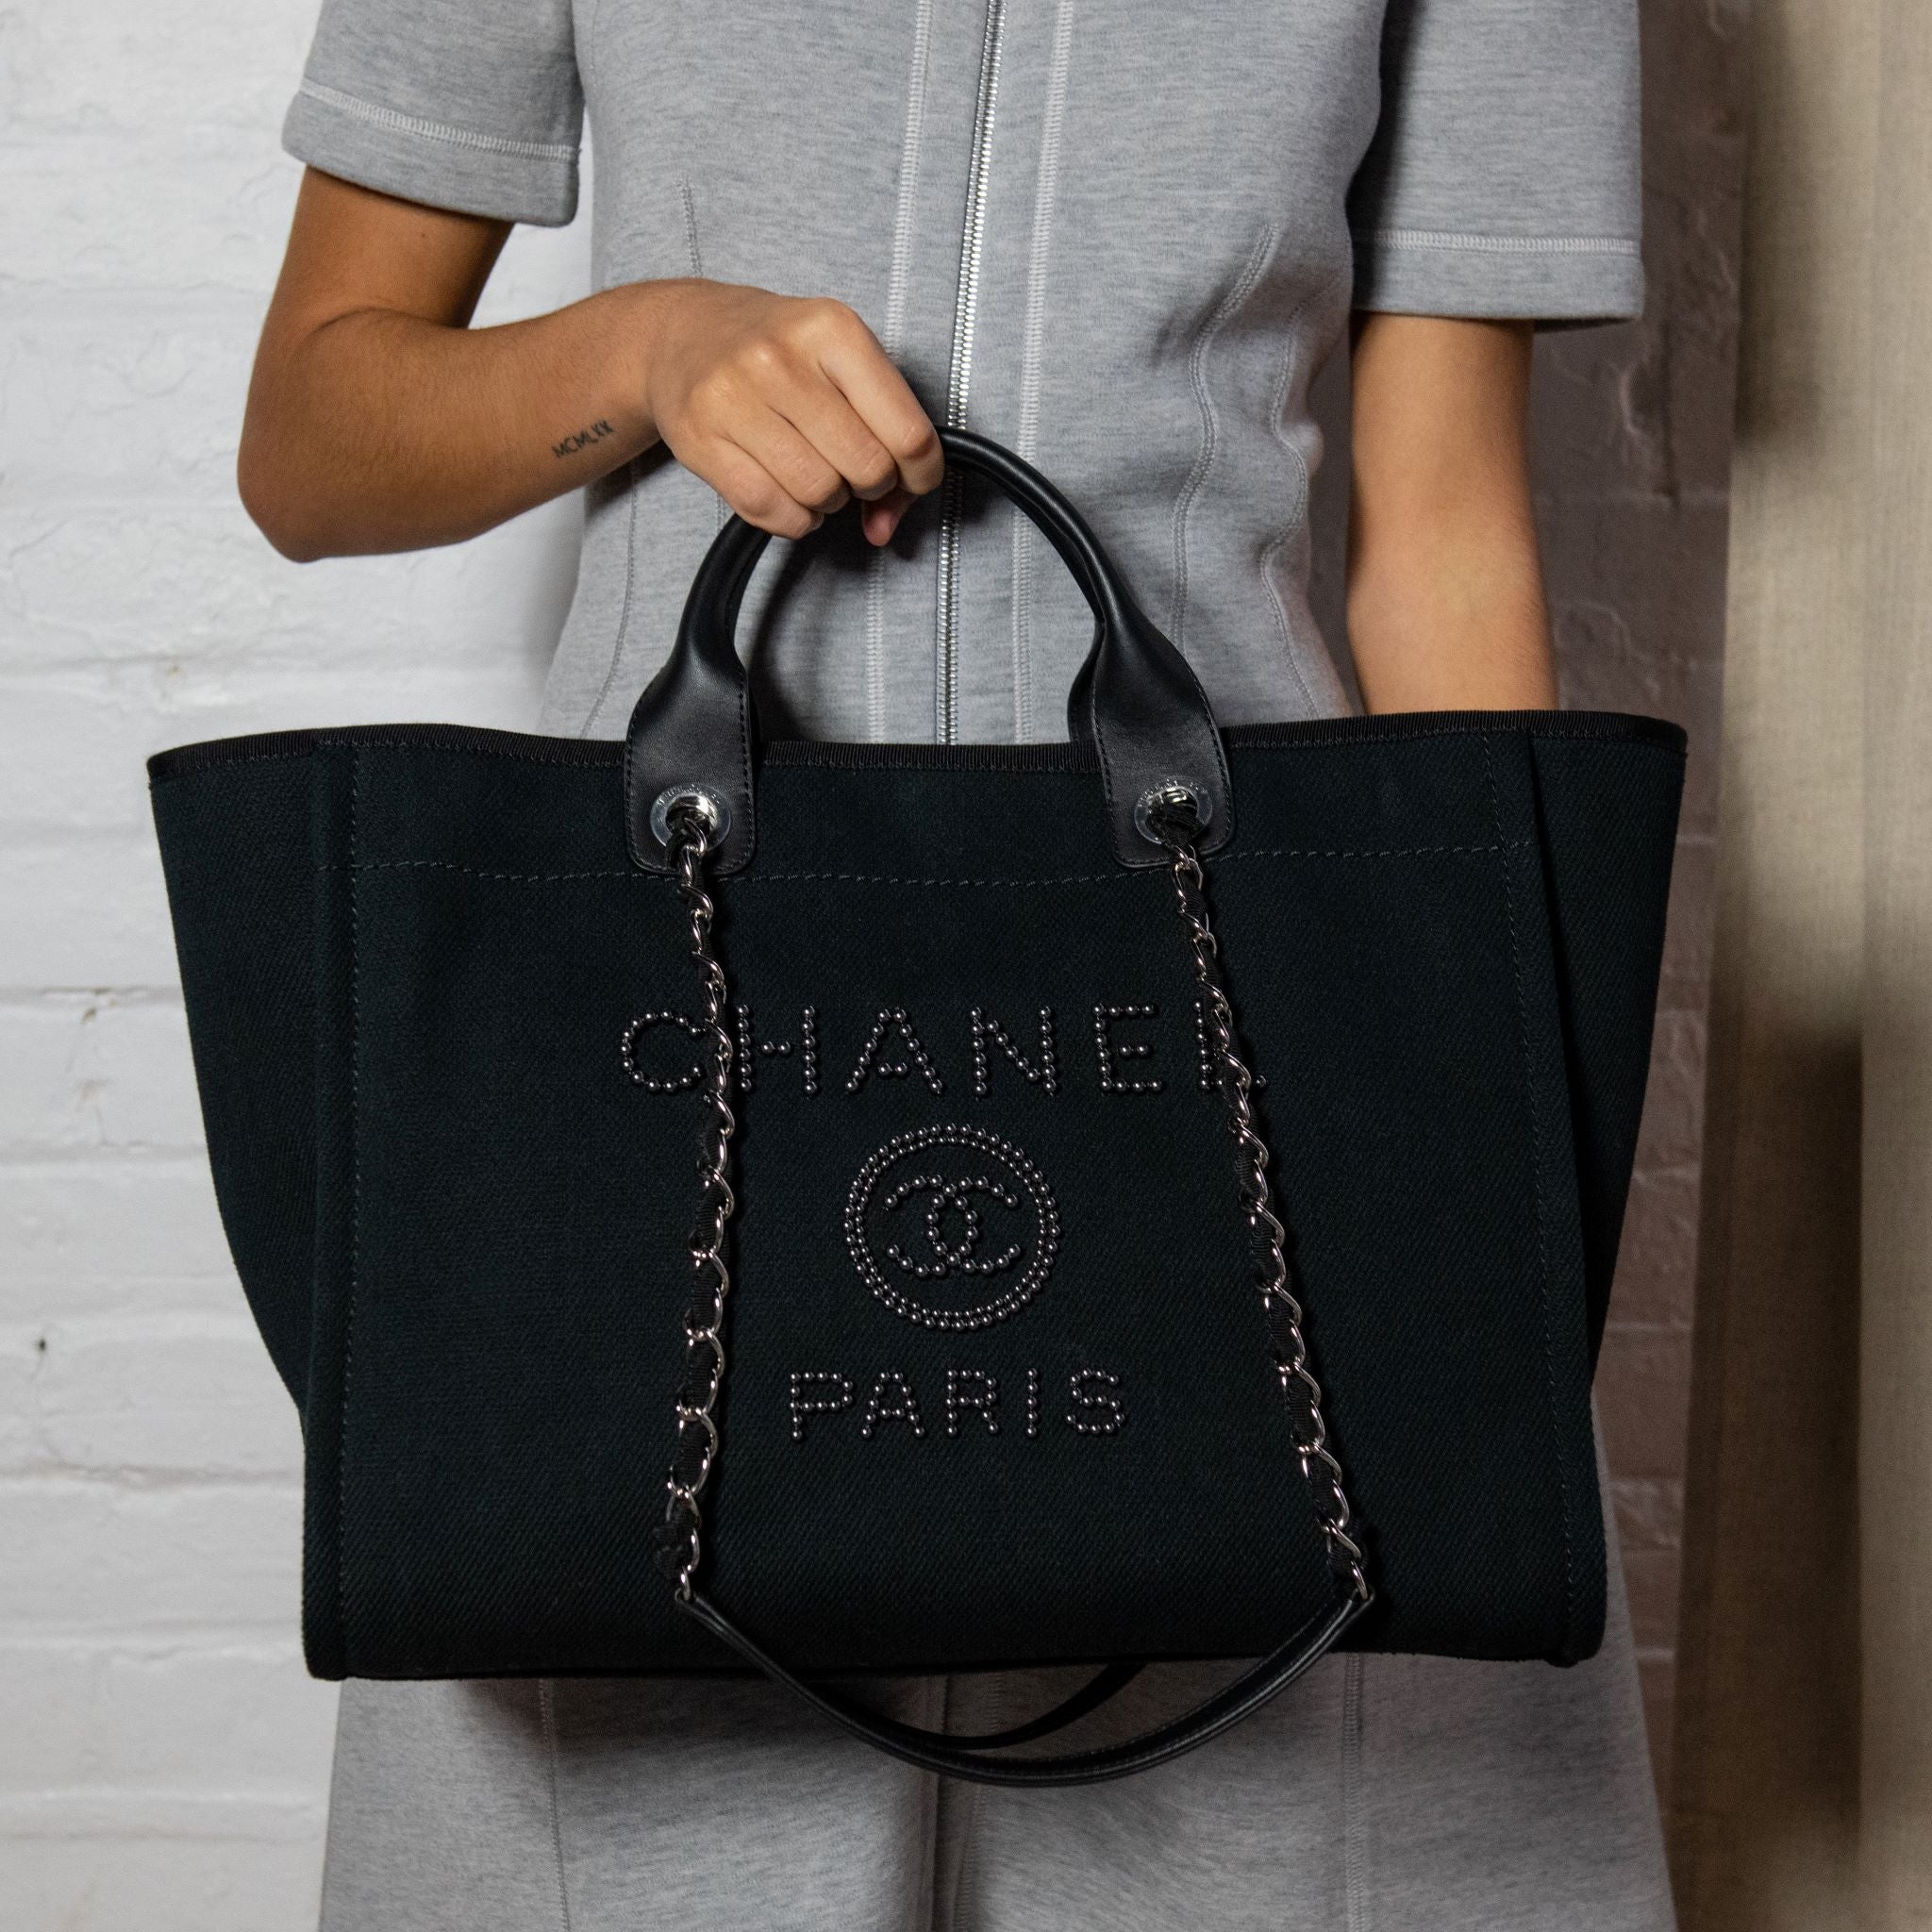 Chanel black canvas pearl deauville tote - Bags & Luggage - Holmdel, New  Jersey, Facebook Marketplace